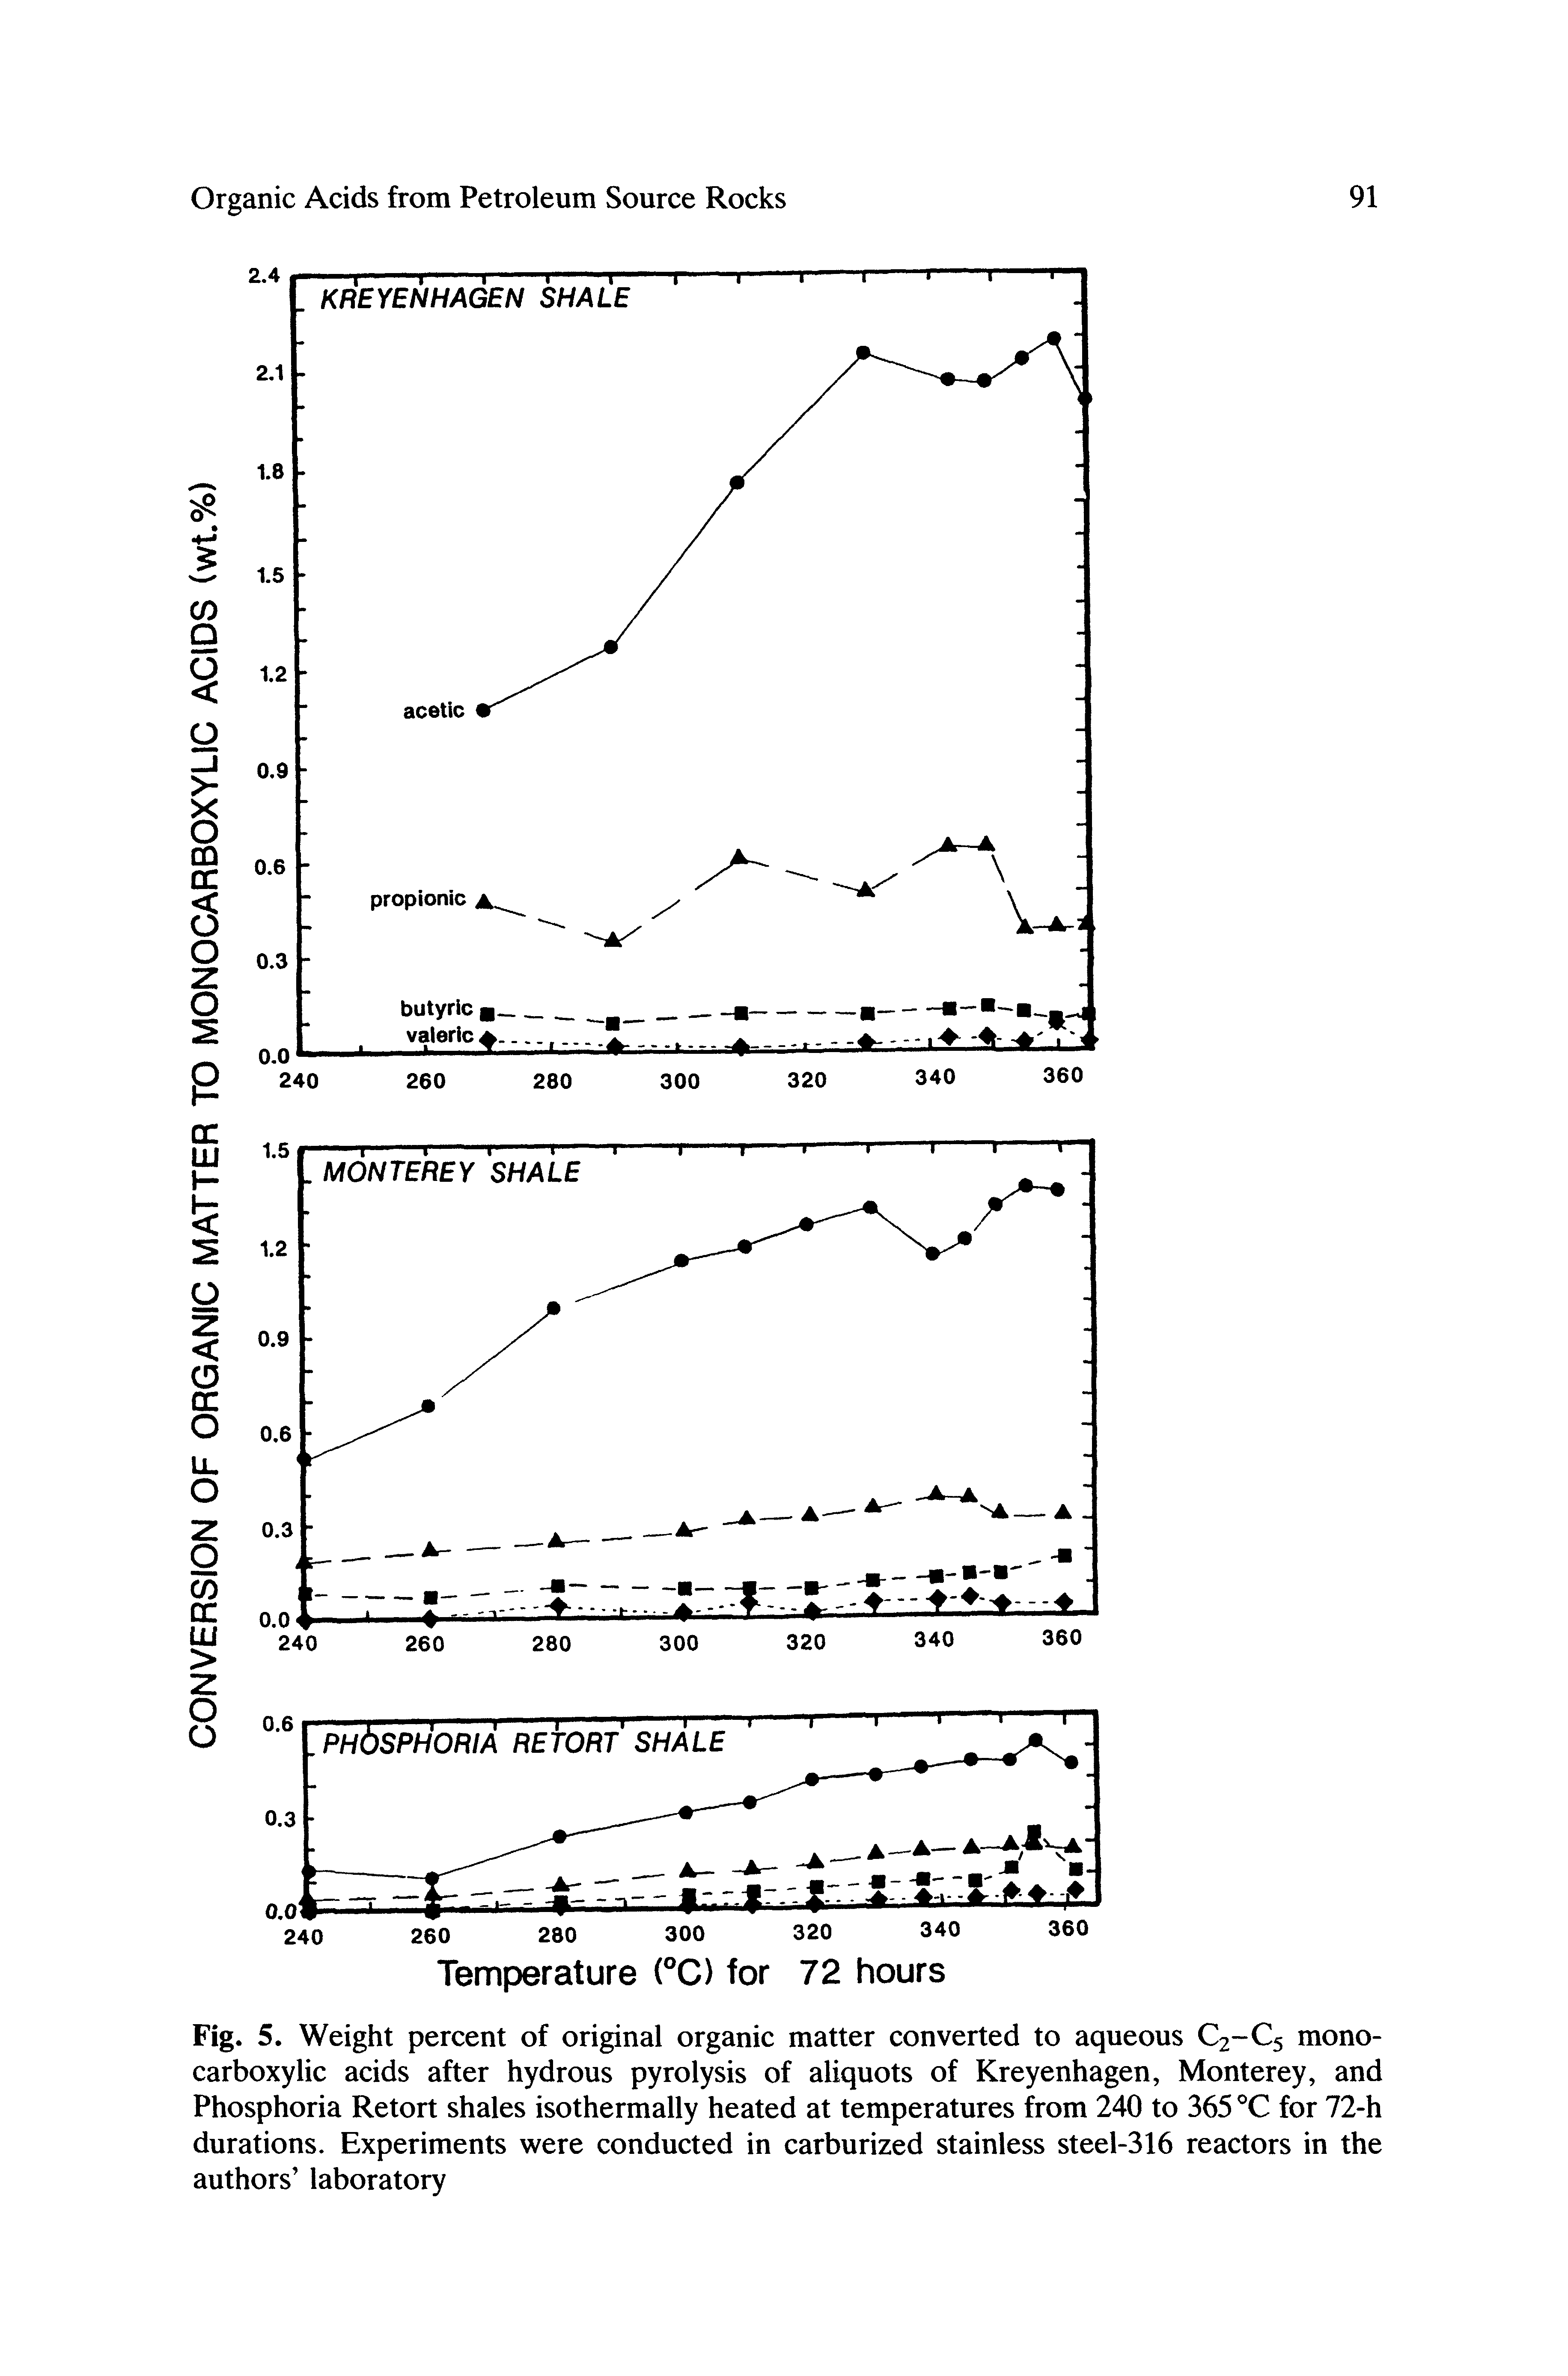 Fig. 5. Weight percent of original organic matter converted to aqueous C2-C5 mono-carboxylic acids after hydrous pyrolysis of aliquots of Kreyenhagen, Monterey, and Phosphoria Retort shales isothermally heated at temperatures from 240 to 365 for 72-h durations. Experiments were conducted in carburized stainless steel-316 reactors in the authors laboratory...